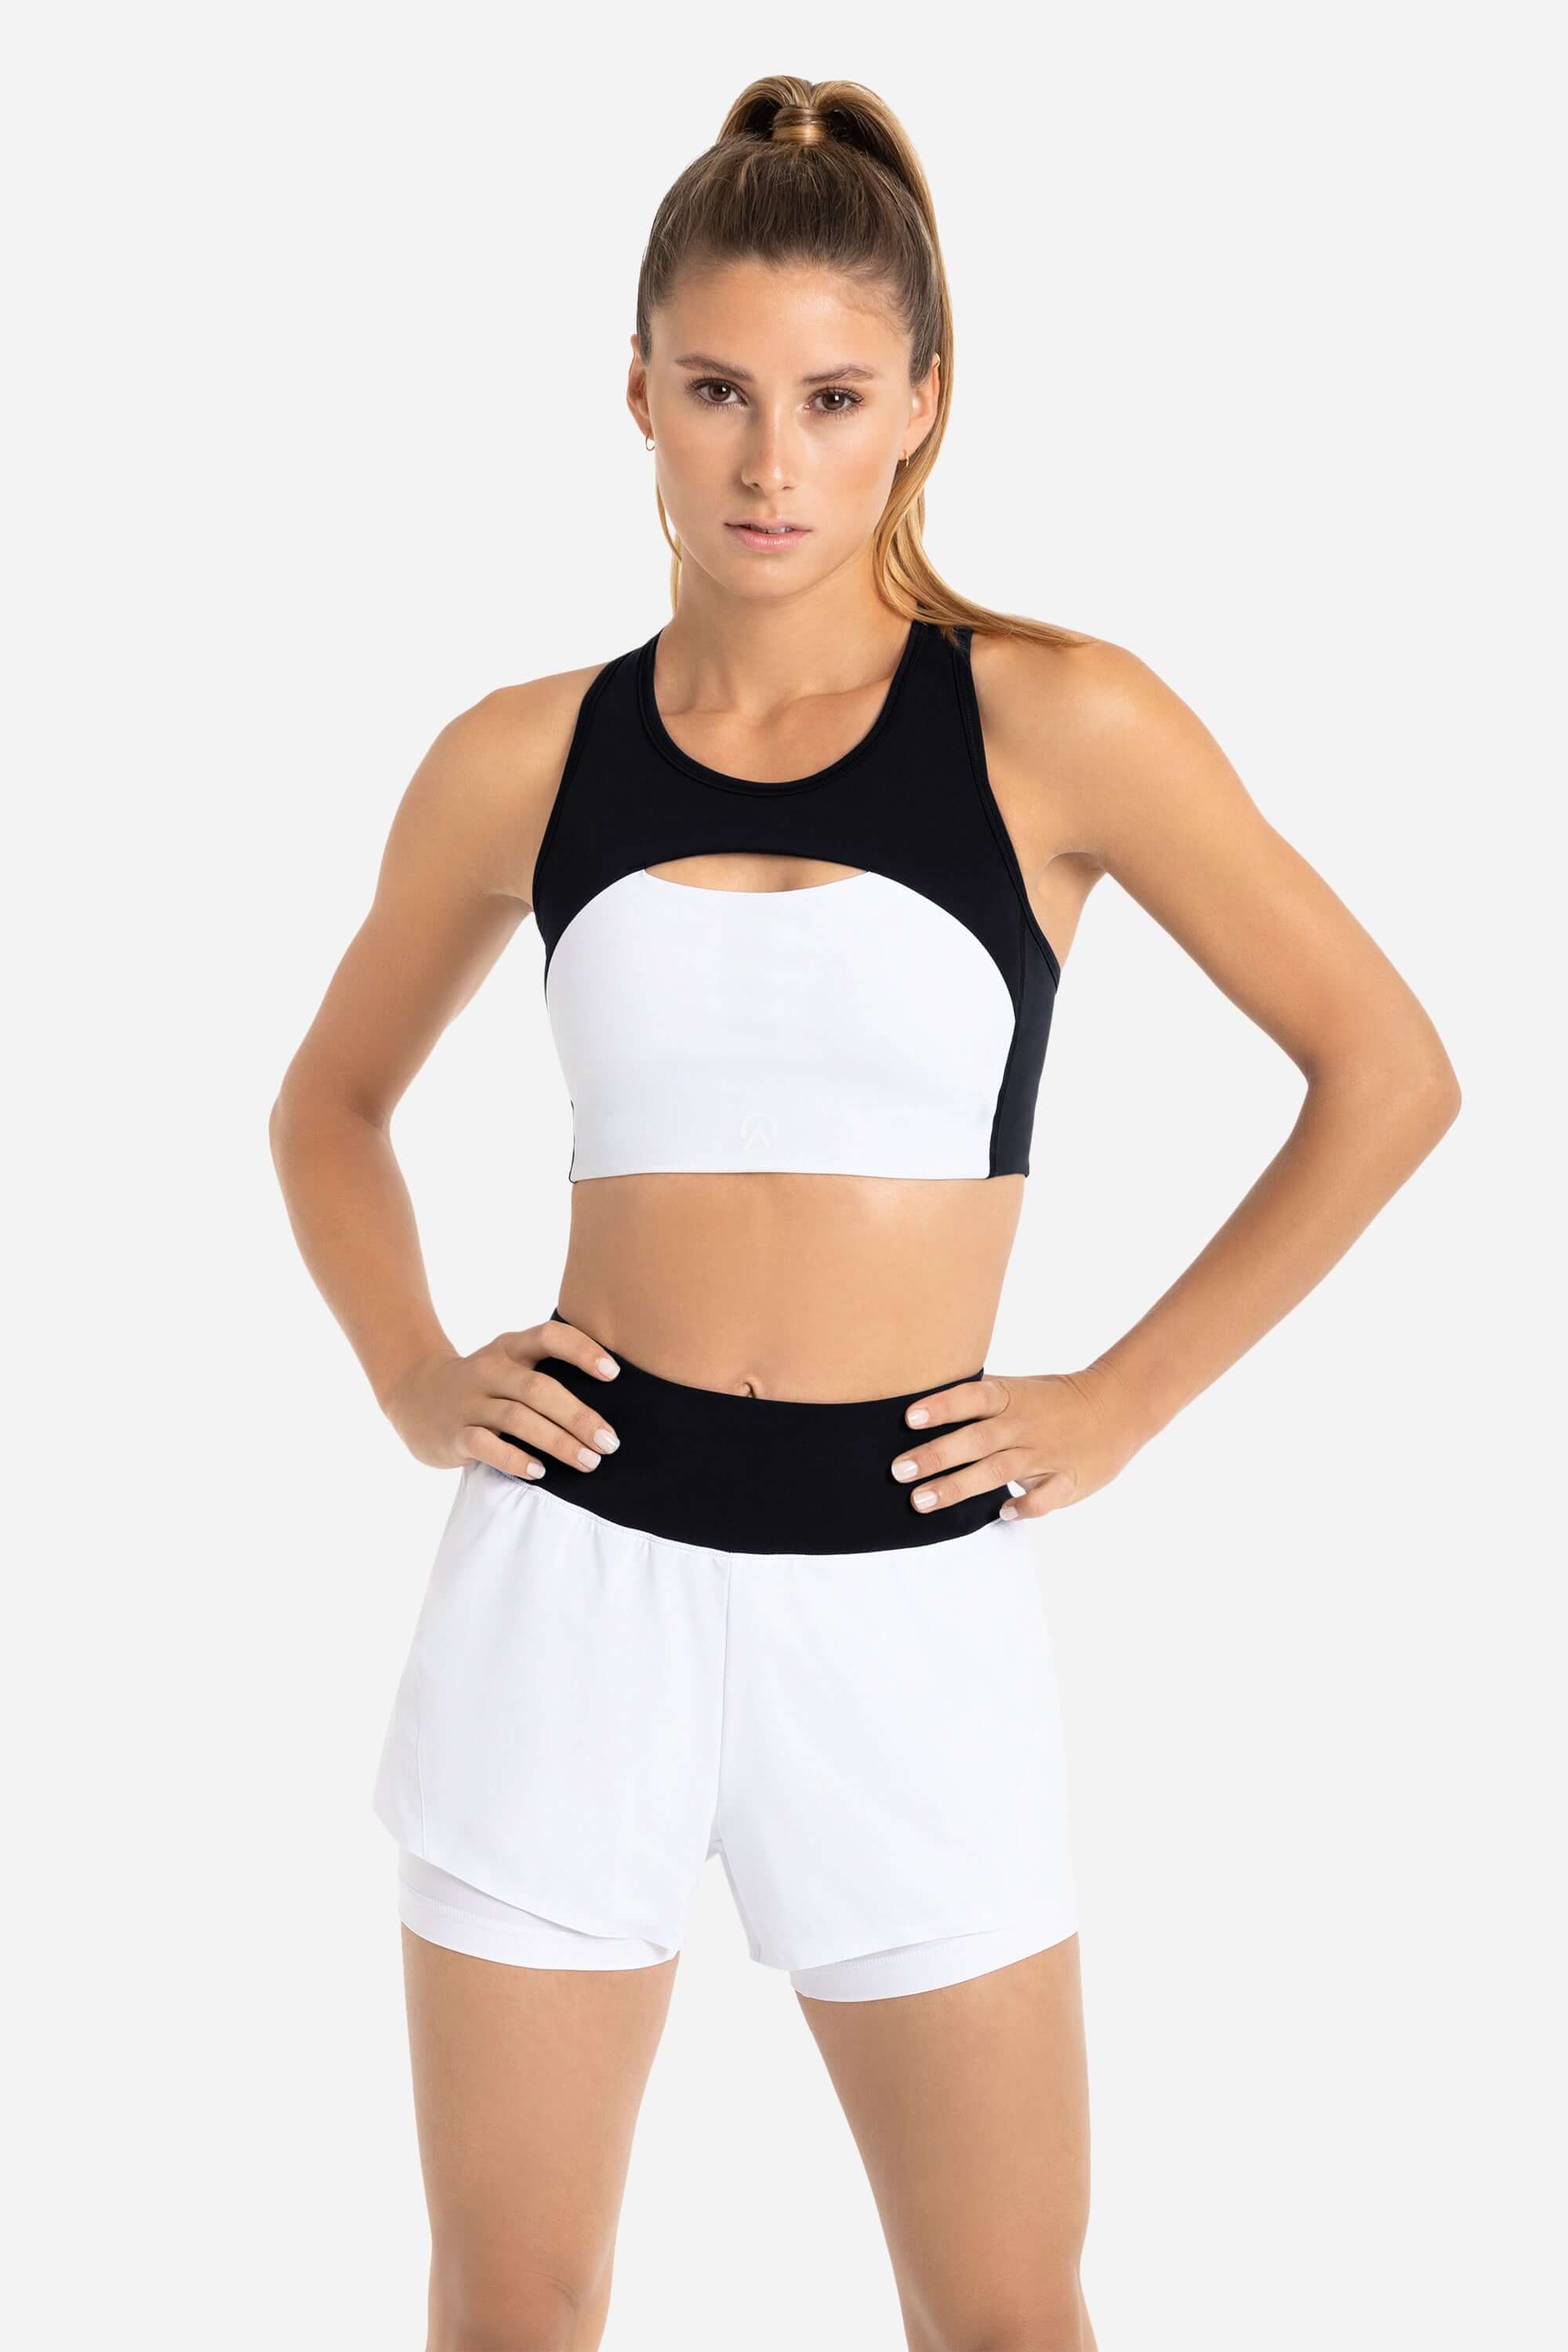 Women workout and gym sports bra and shorts white - black